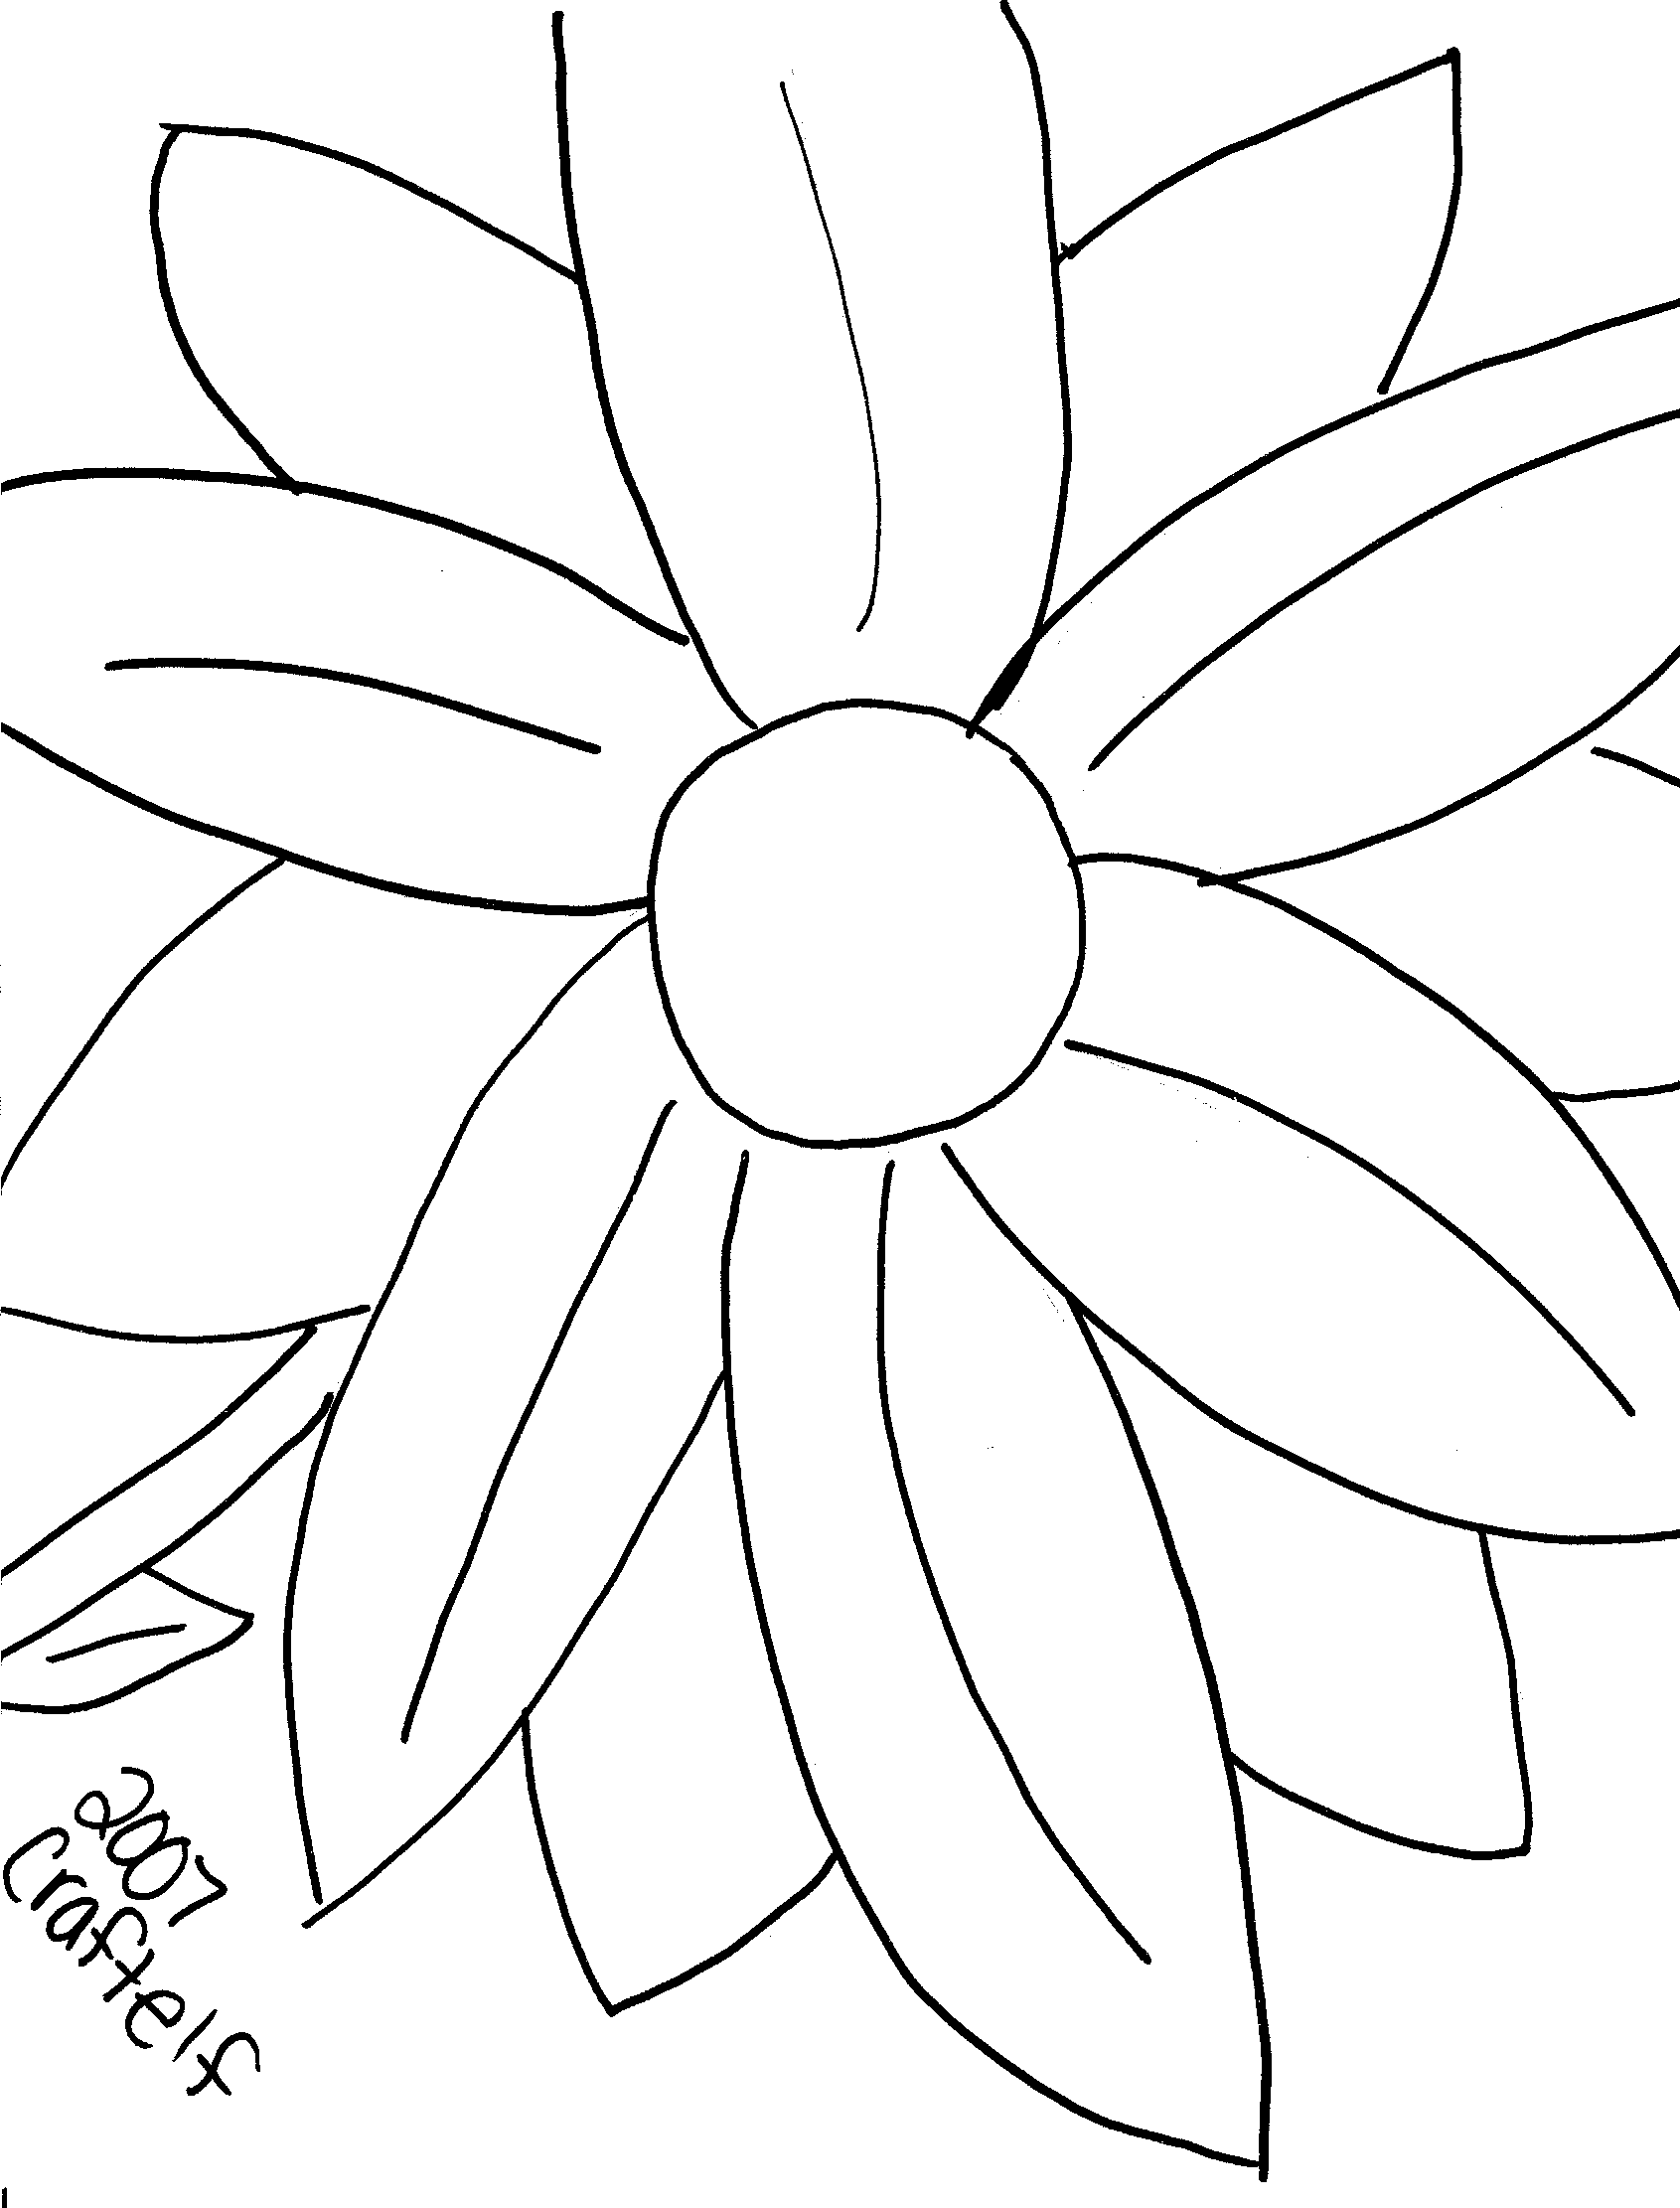 Collections of Free Coloring Pictures of Flowers |Free coloring on Clipart Library